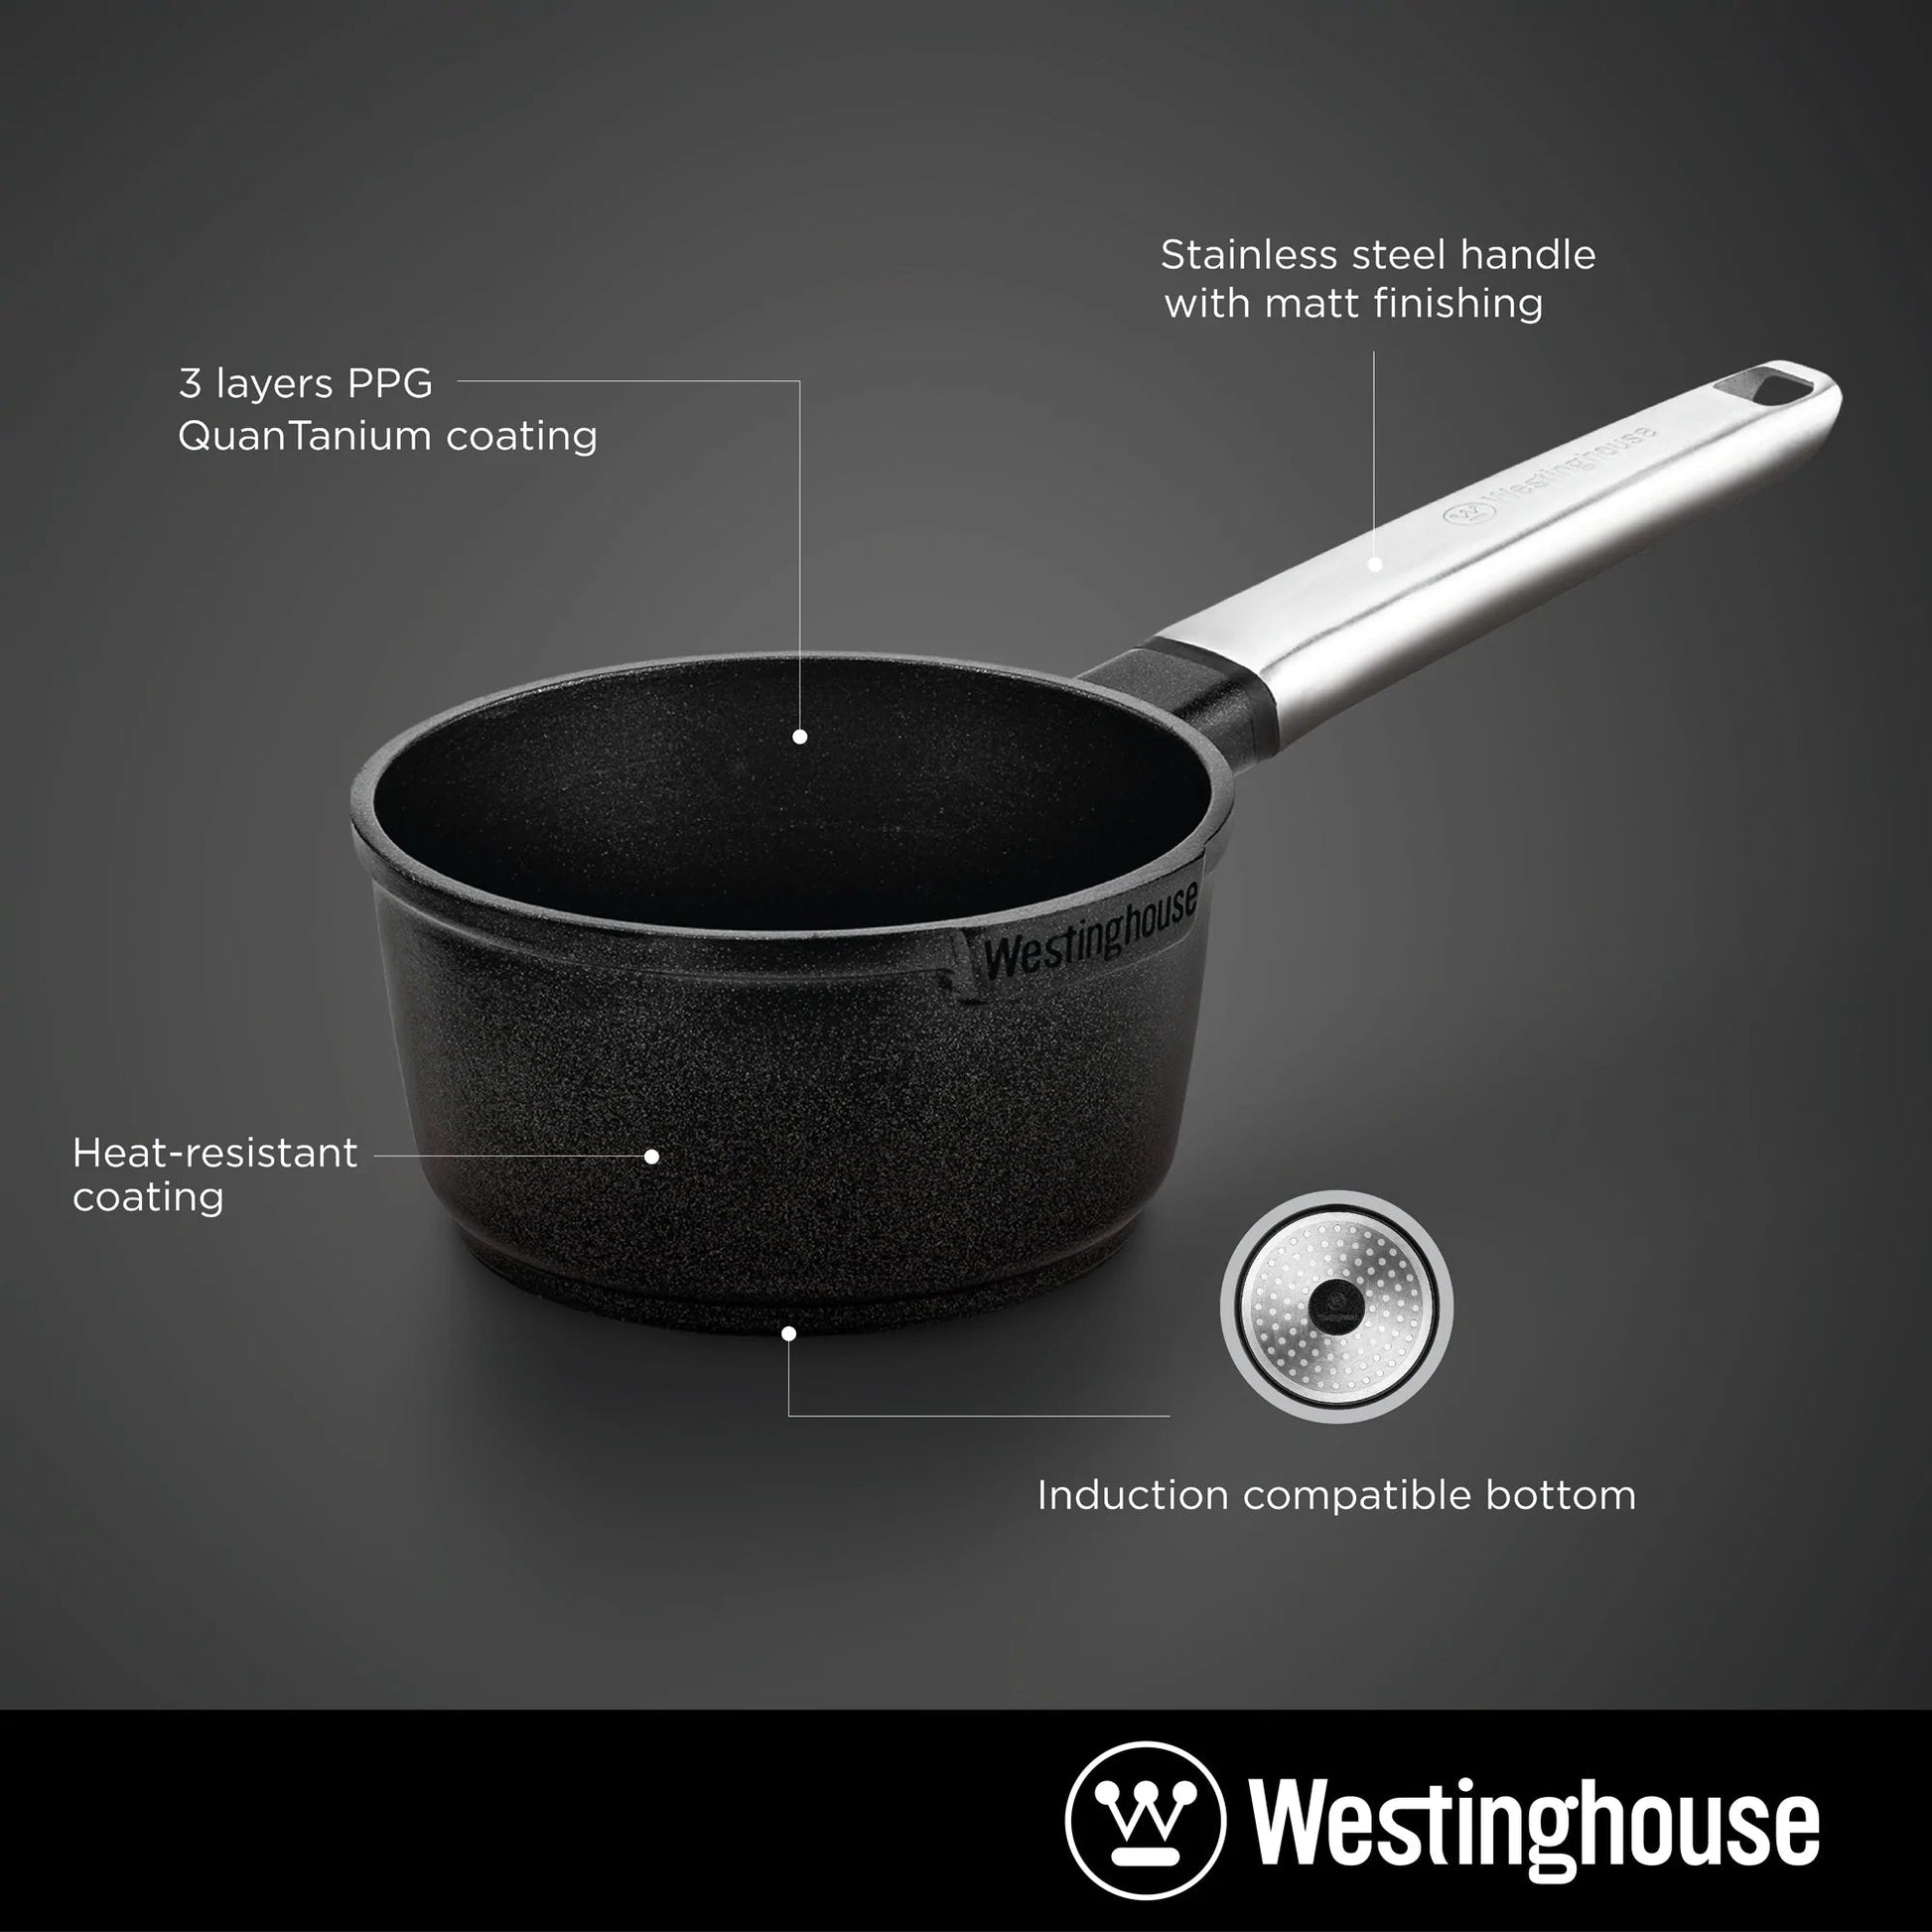 Westinghouse WH-2 Carbon Steel Baking Pan Set with 1 Loaf Pan 1 Round Pan & 1 Cookie Tray Premium Non-Stick Coating - 3 Piece